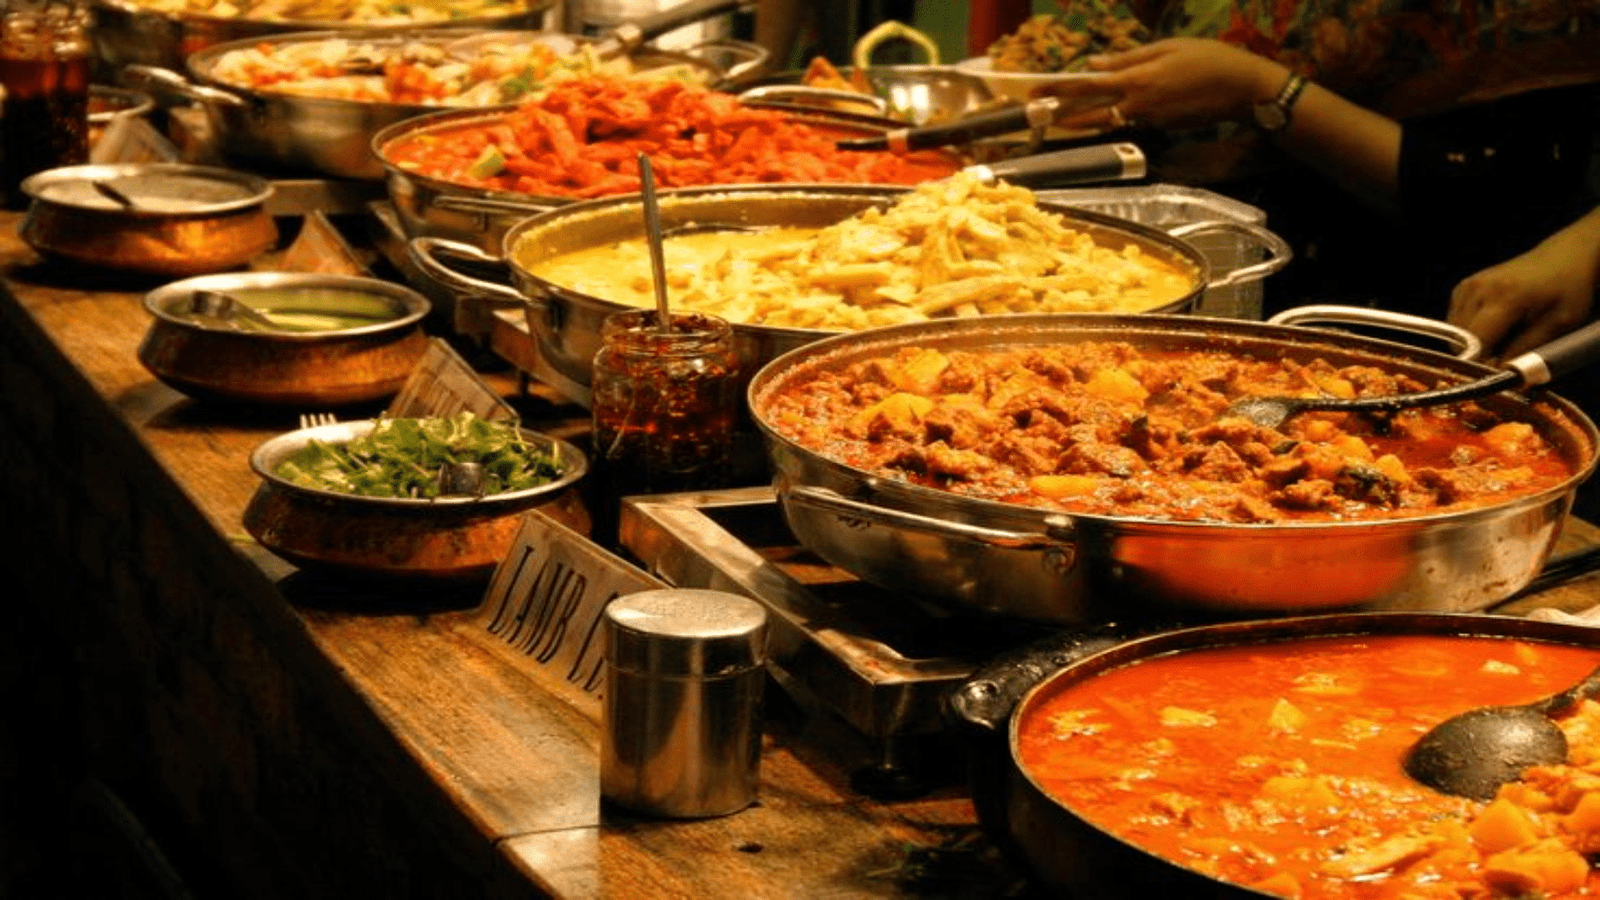 Punjab govt to implement ‘one-dish rule’ at weddings